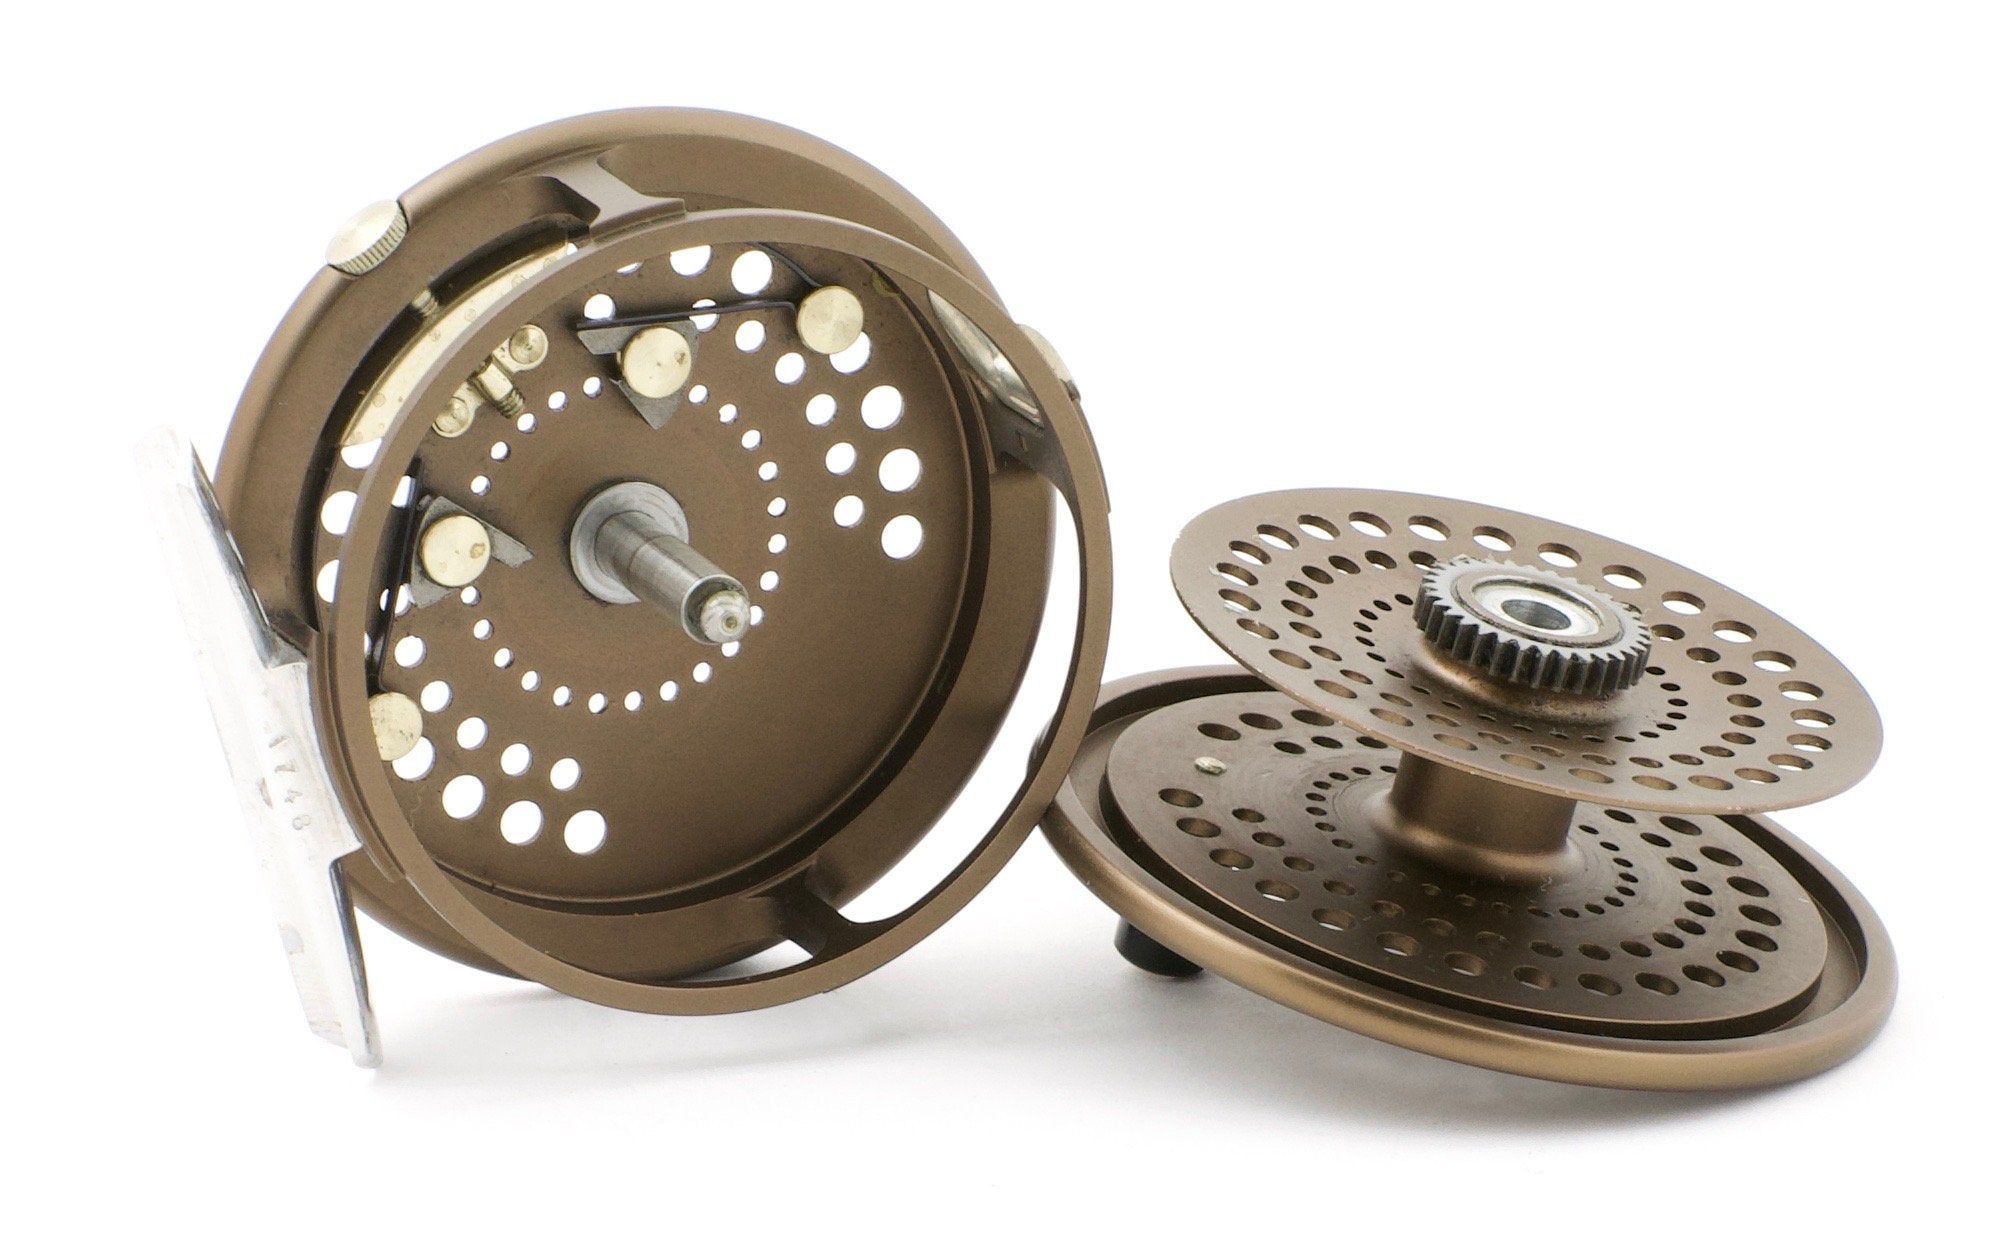 Sage / Hardy - 504L Fly Reel w/ Spare Spool - Made By Hardy - Freestone  Vintage Tackle